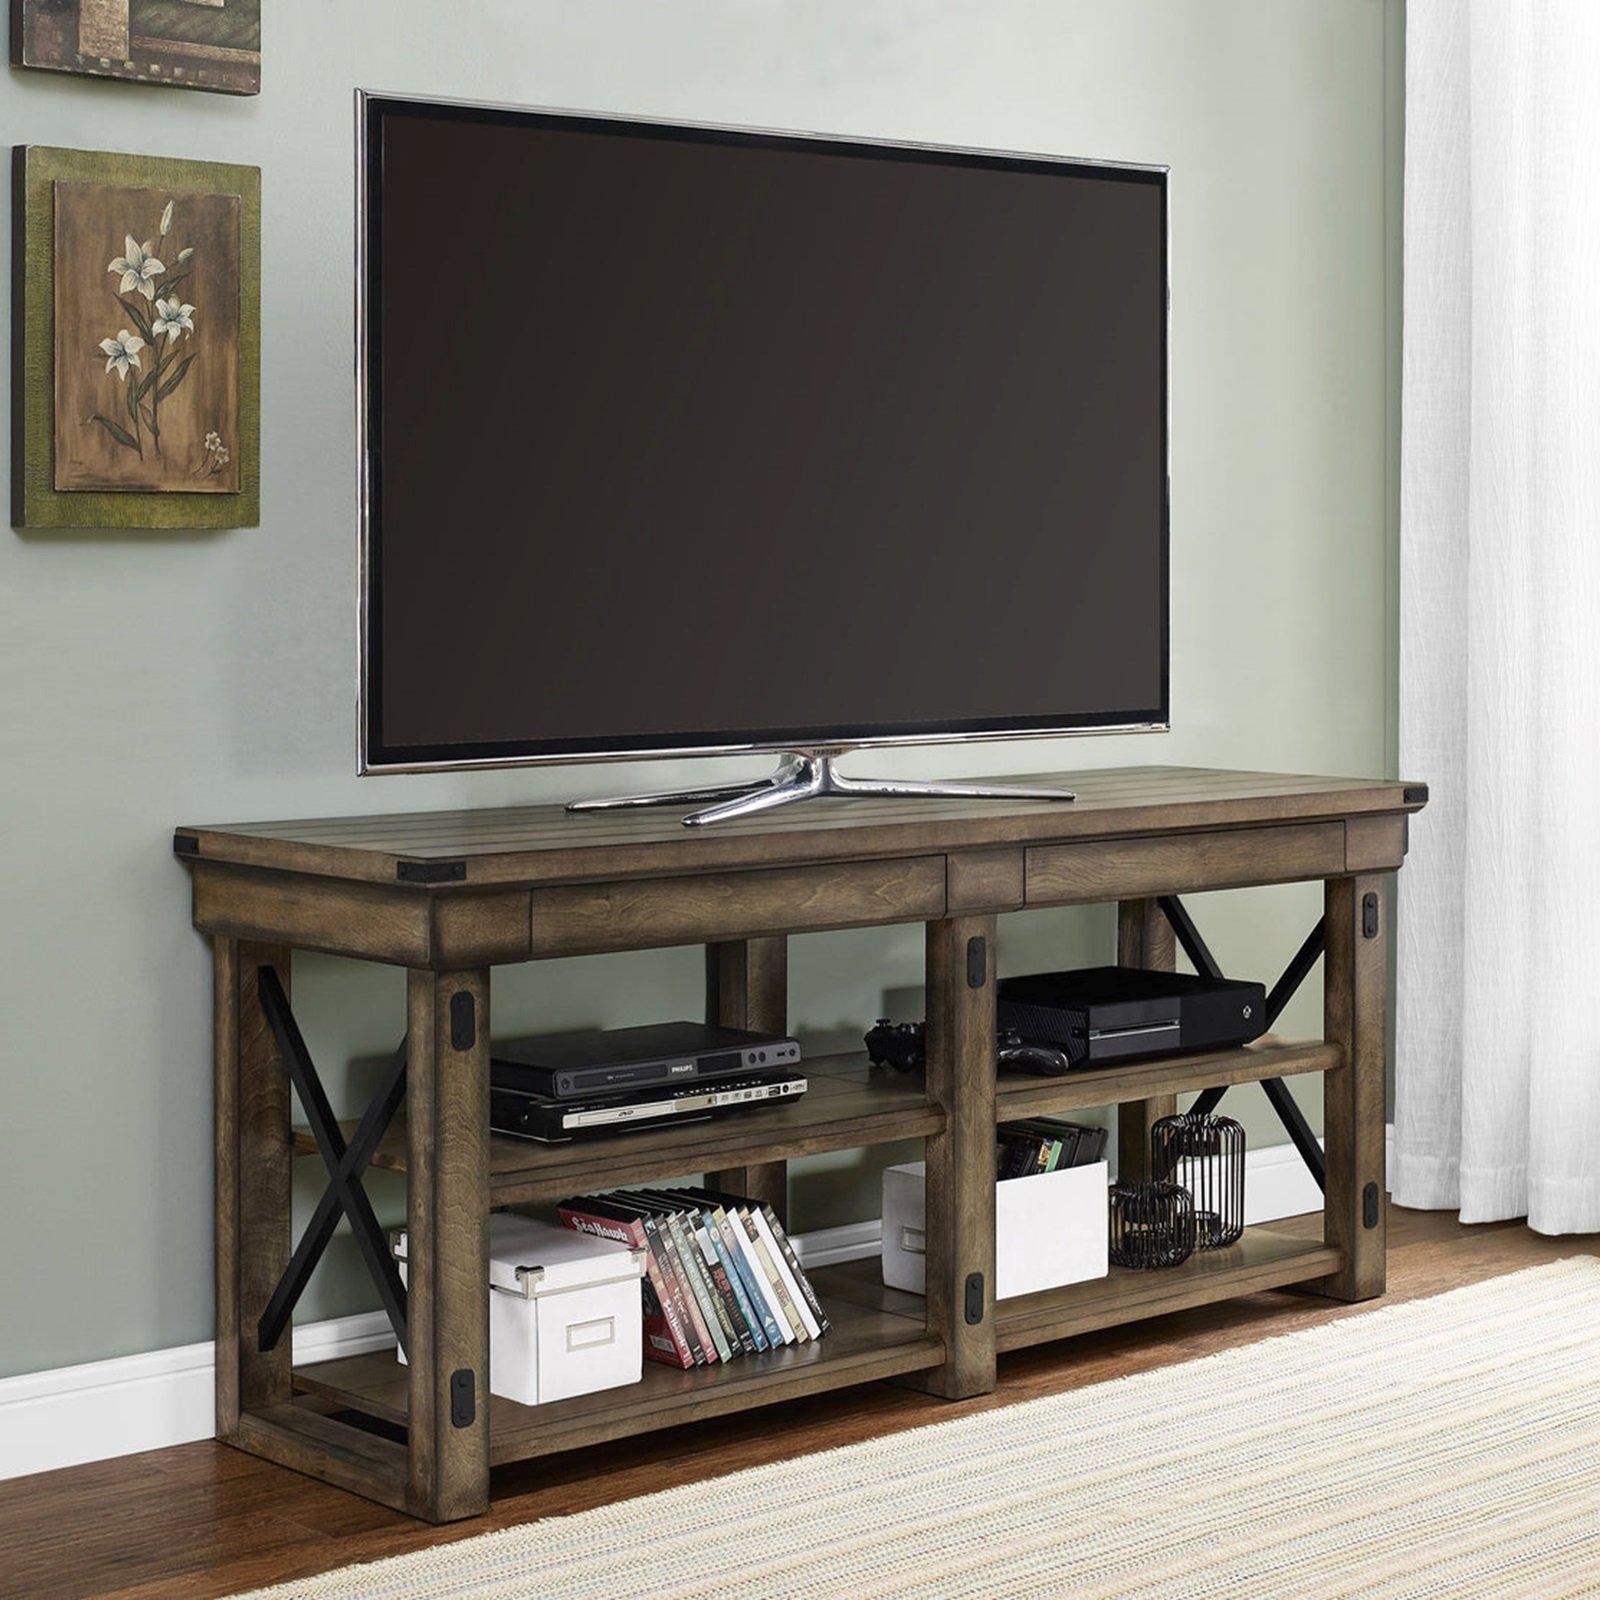 Rustic TV Stand Wooden Veneer Table With Drawers Shelves For Up To 65